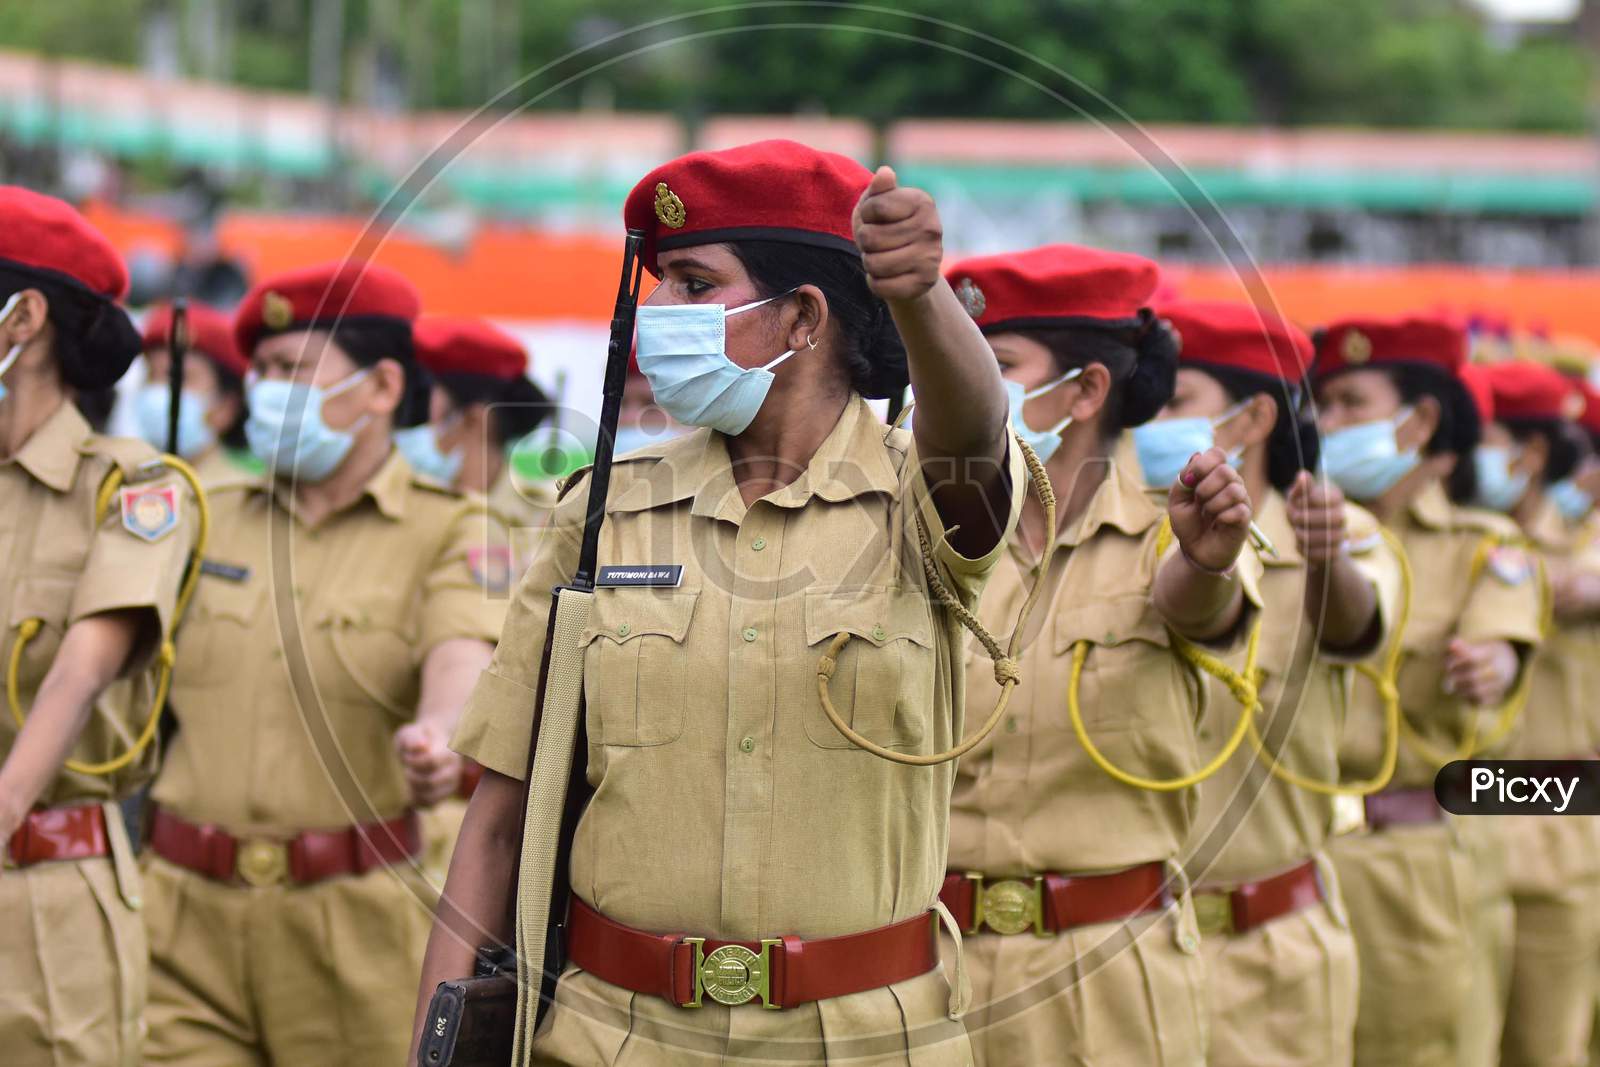 Assam Police Women Take Part On The Occasion of 74th Independence Day Celebrations At Nurul Amin Stadium In Nagaon District Of Assam On August 15, 2020